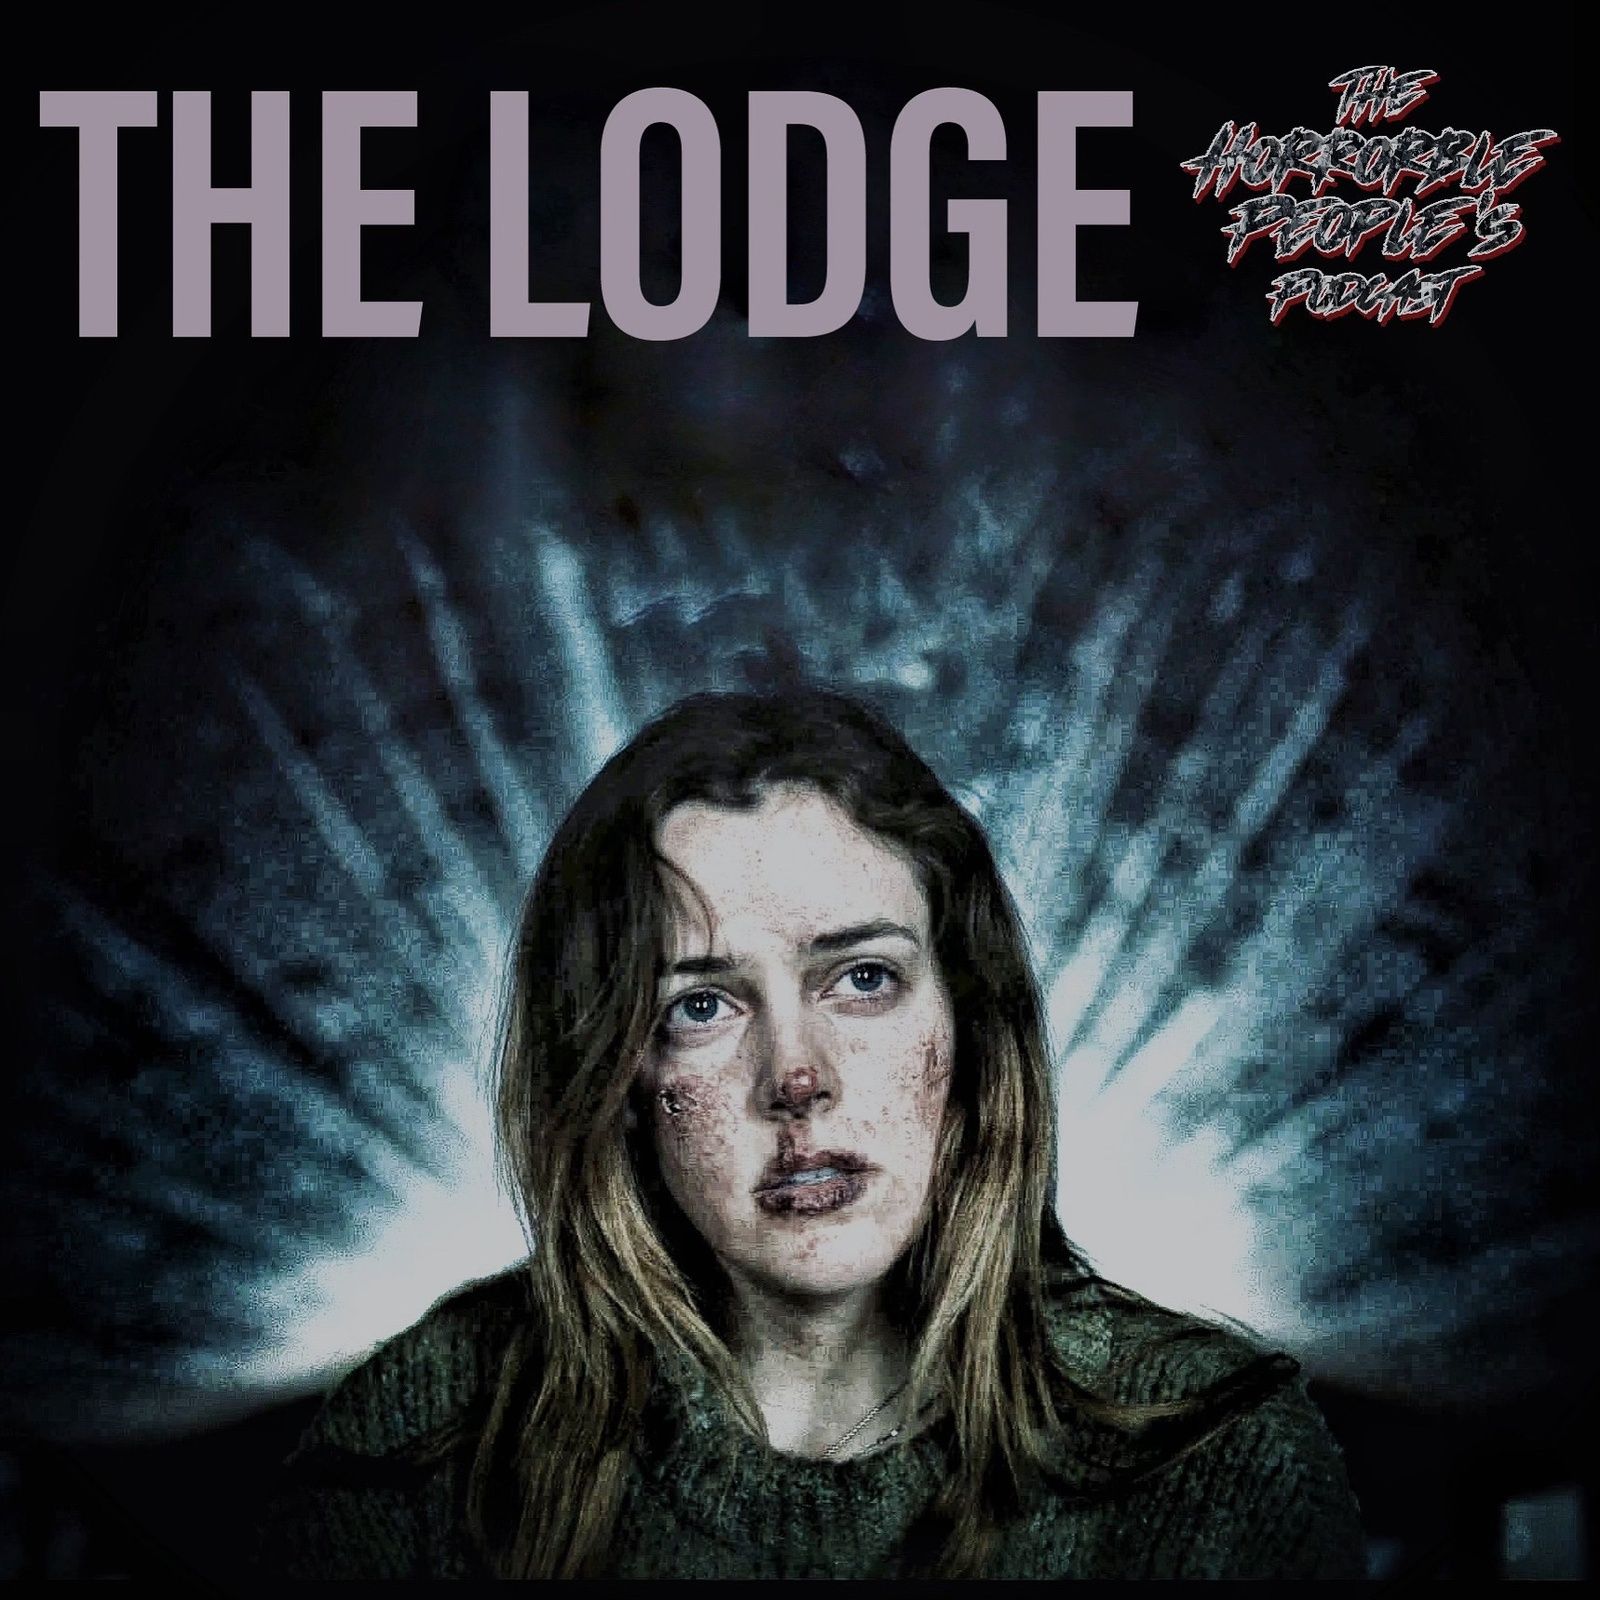 The Horrorble People's Podcast / Episode 198: The Lodge (2019)